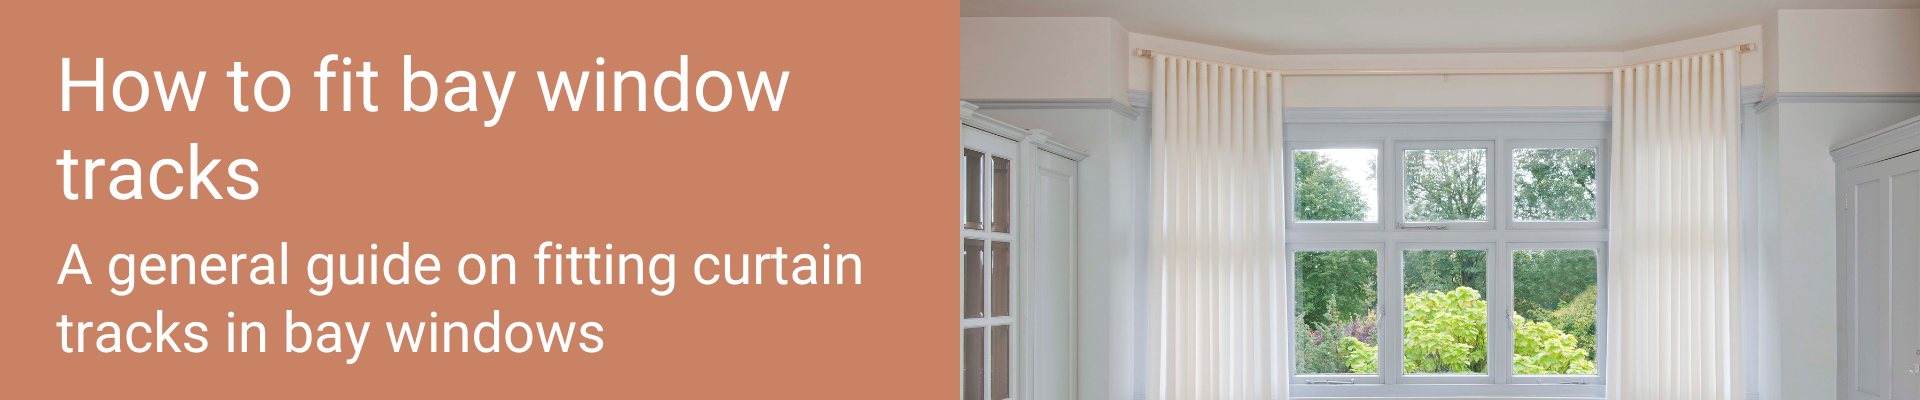 Guides banner for fitting bay window curtain tracks